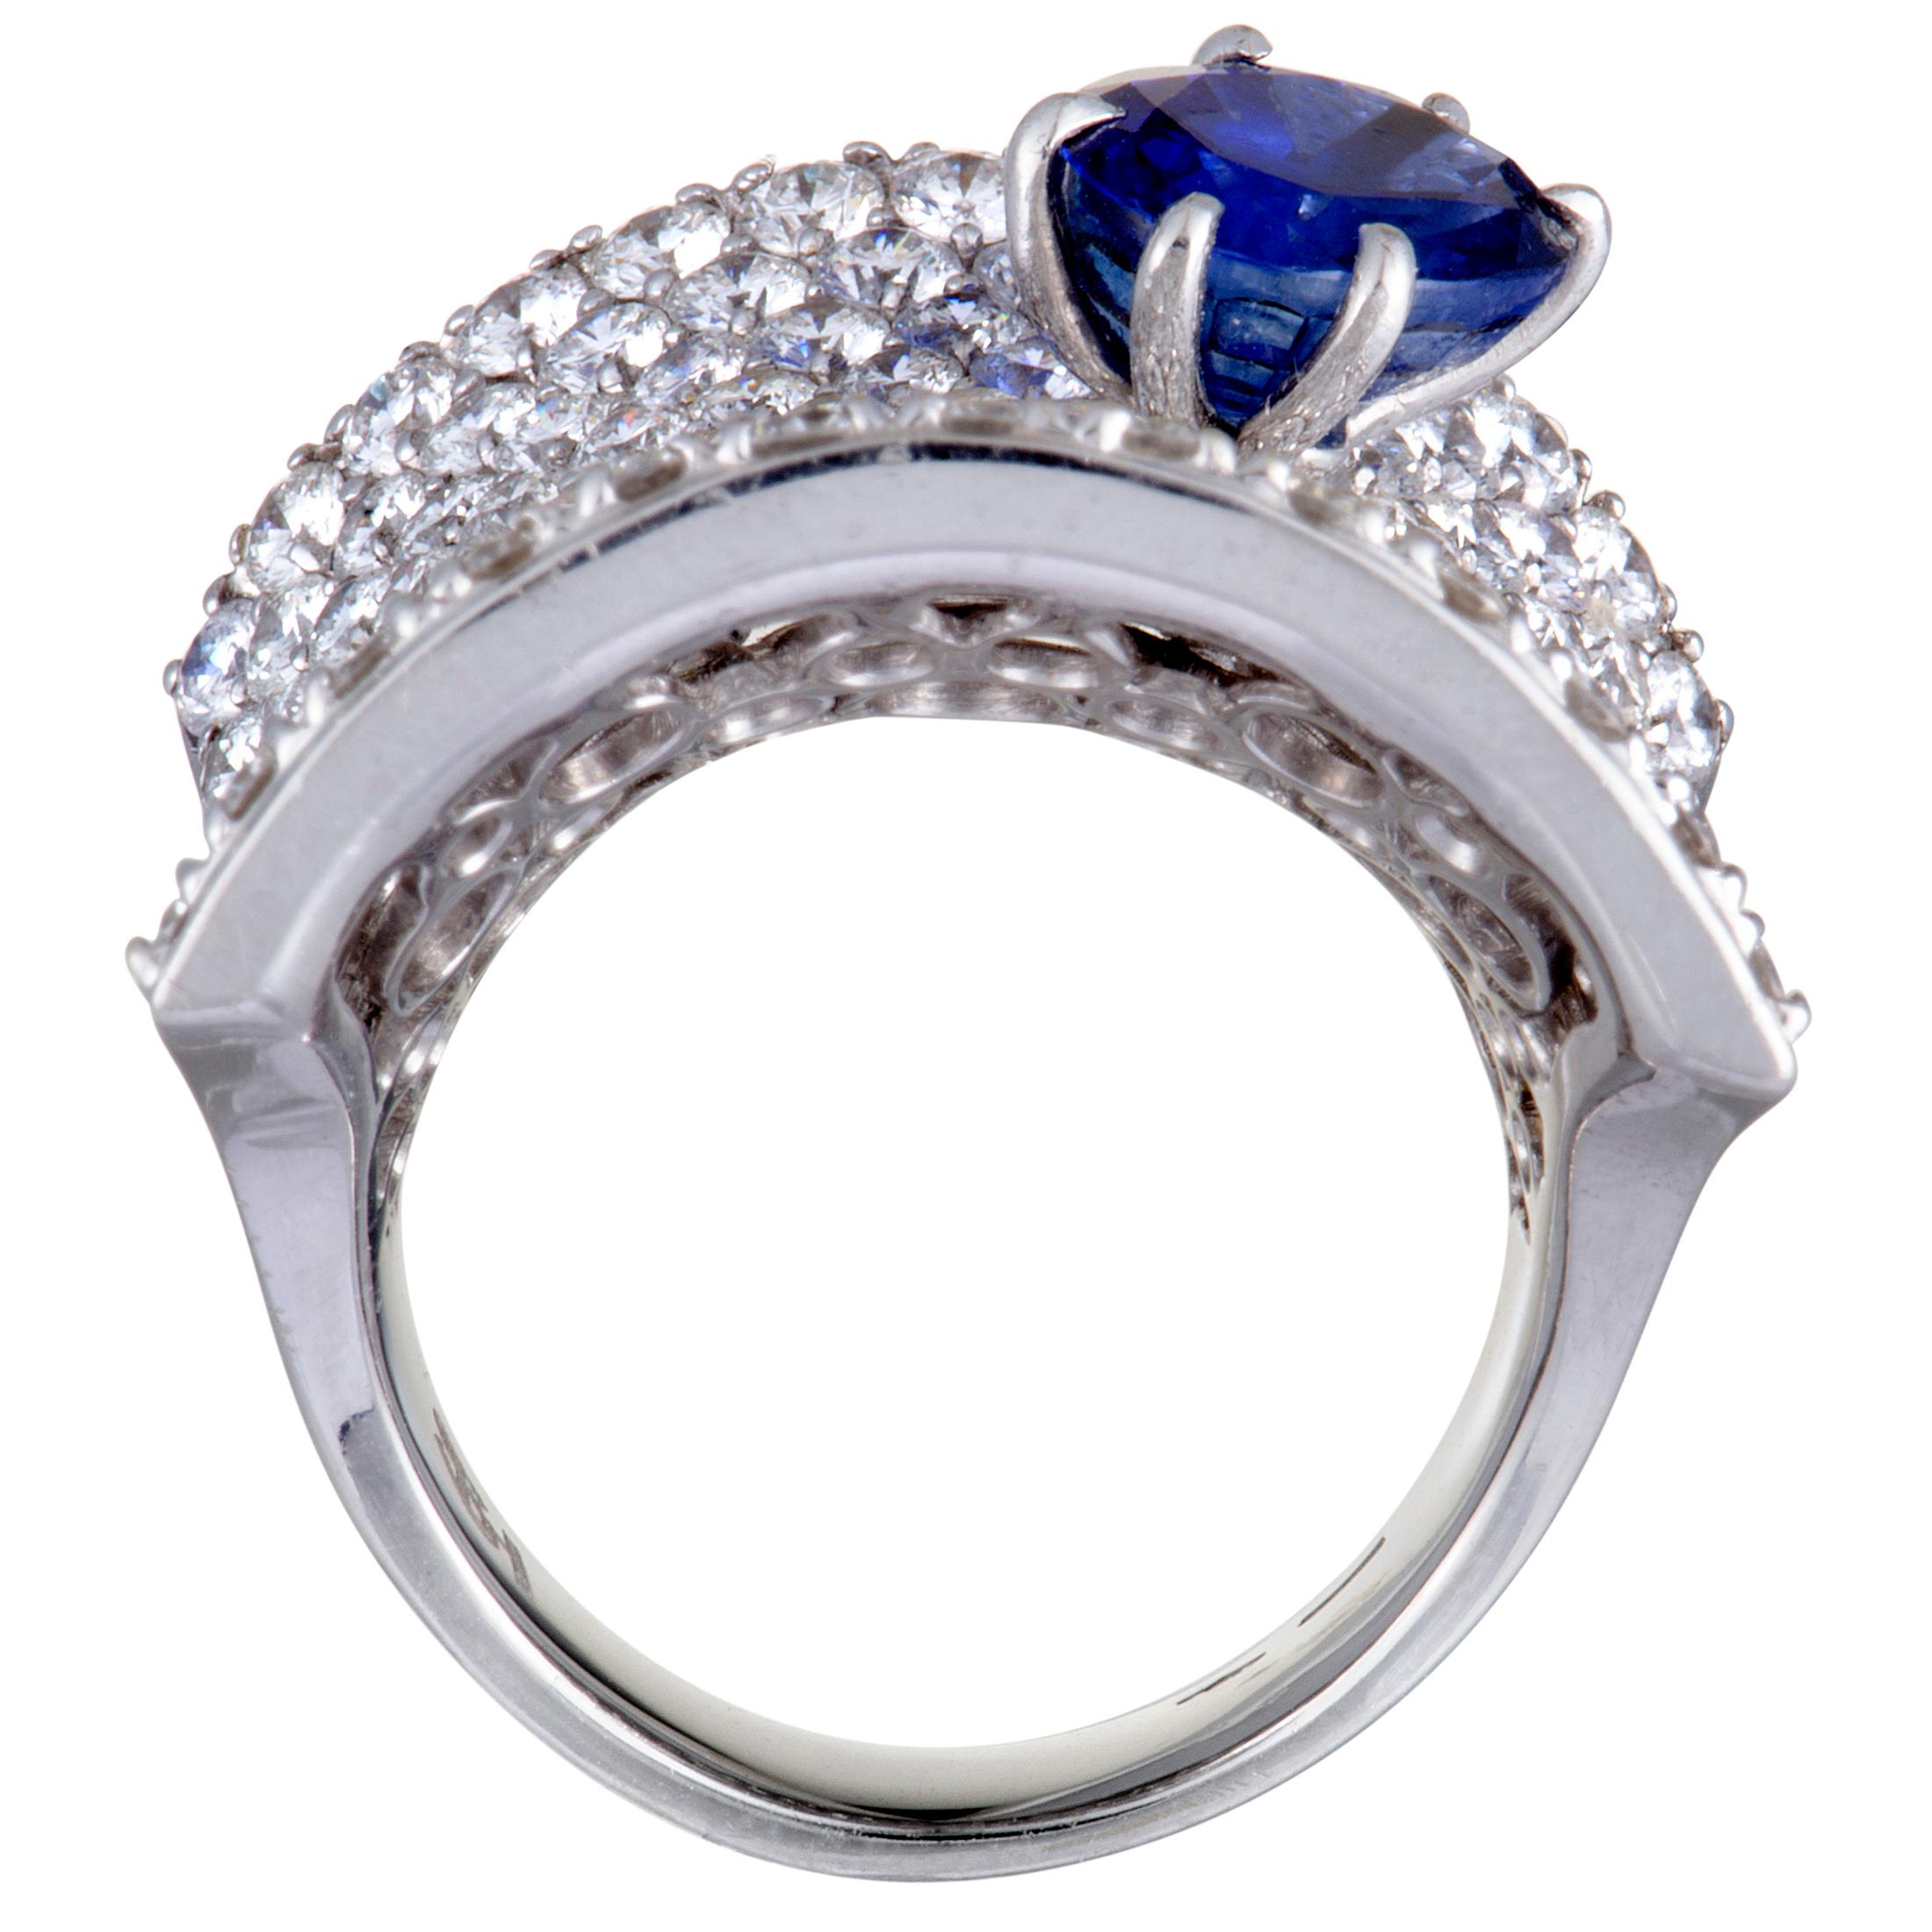 A sense of utmost extravagance and prestige is achieved in this fabulous jewelry piece through combining the ever-resplendent diamonds with the regal allure of sapphire and setting them against the luxurious sheen of 18K white gold. The ring is